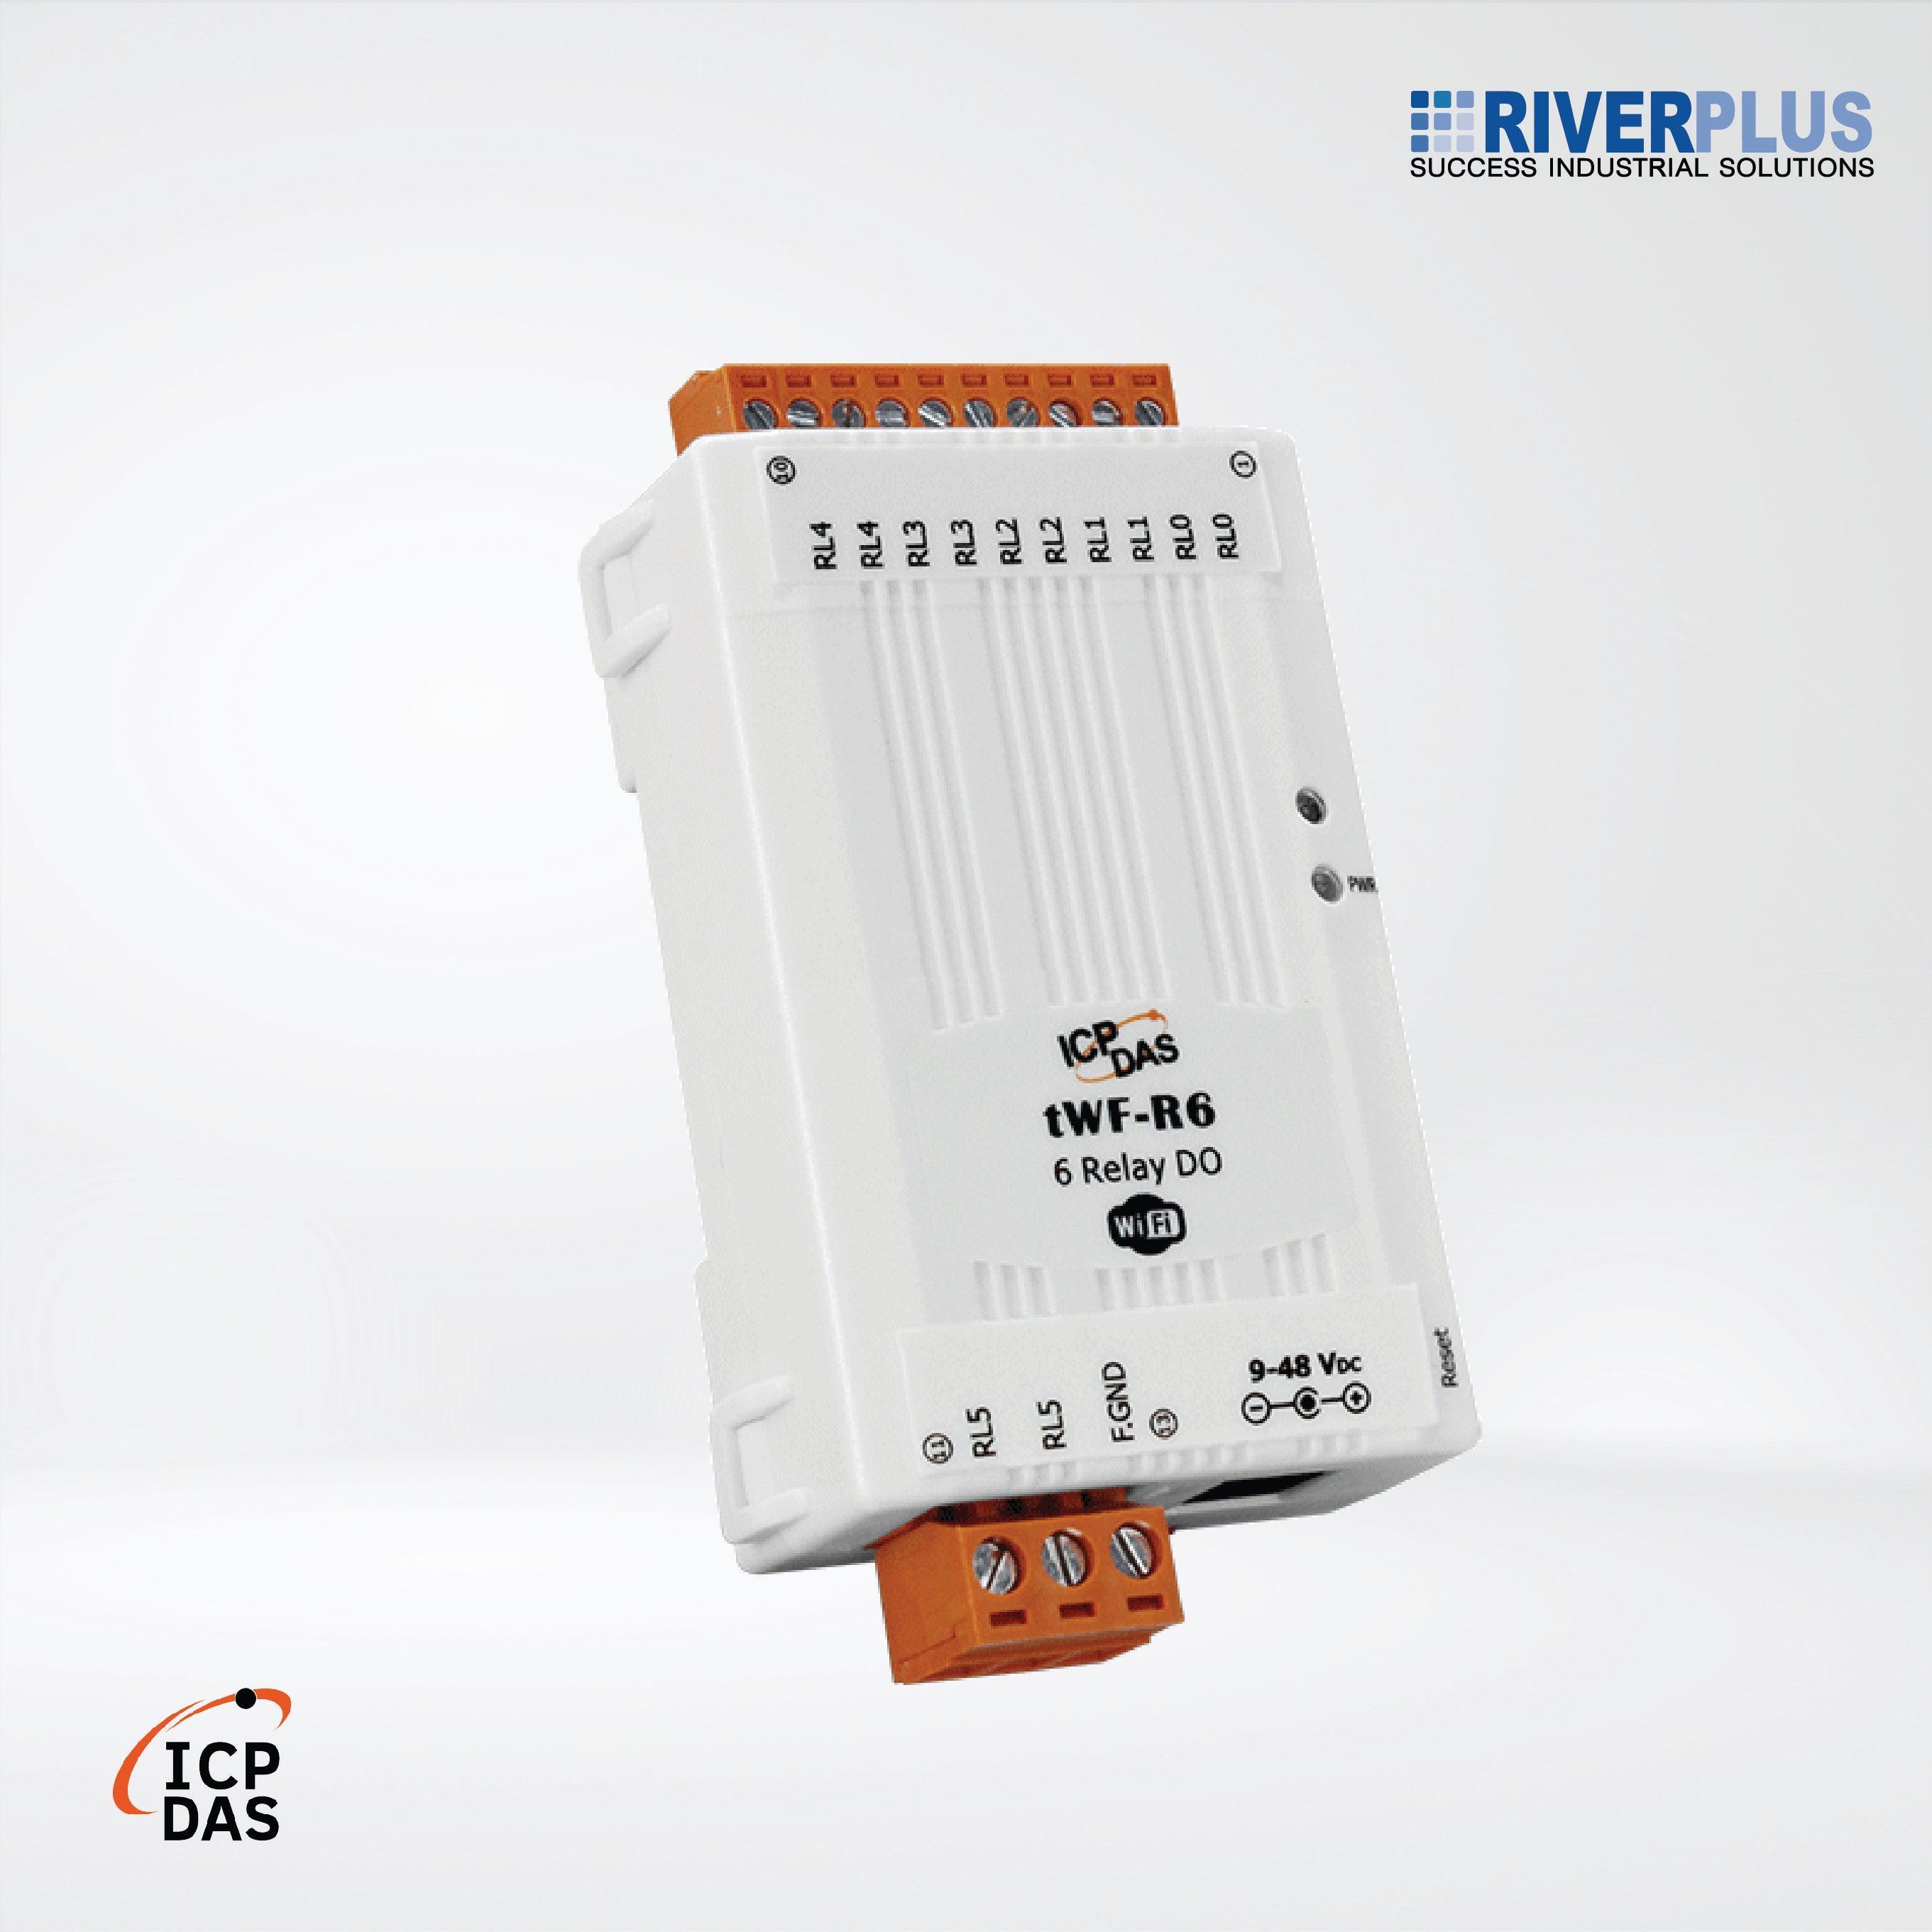 tWF-R6 Tiny Wi-Fi I/O Module with 6-ch Power Relay (Asia Only) - Riverplus